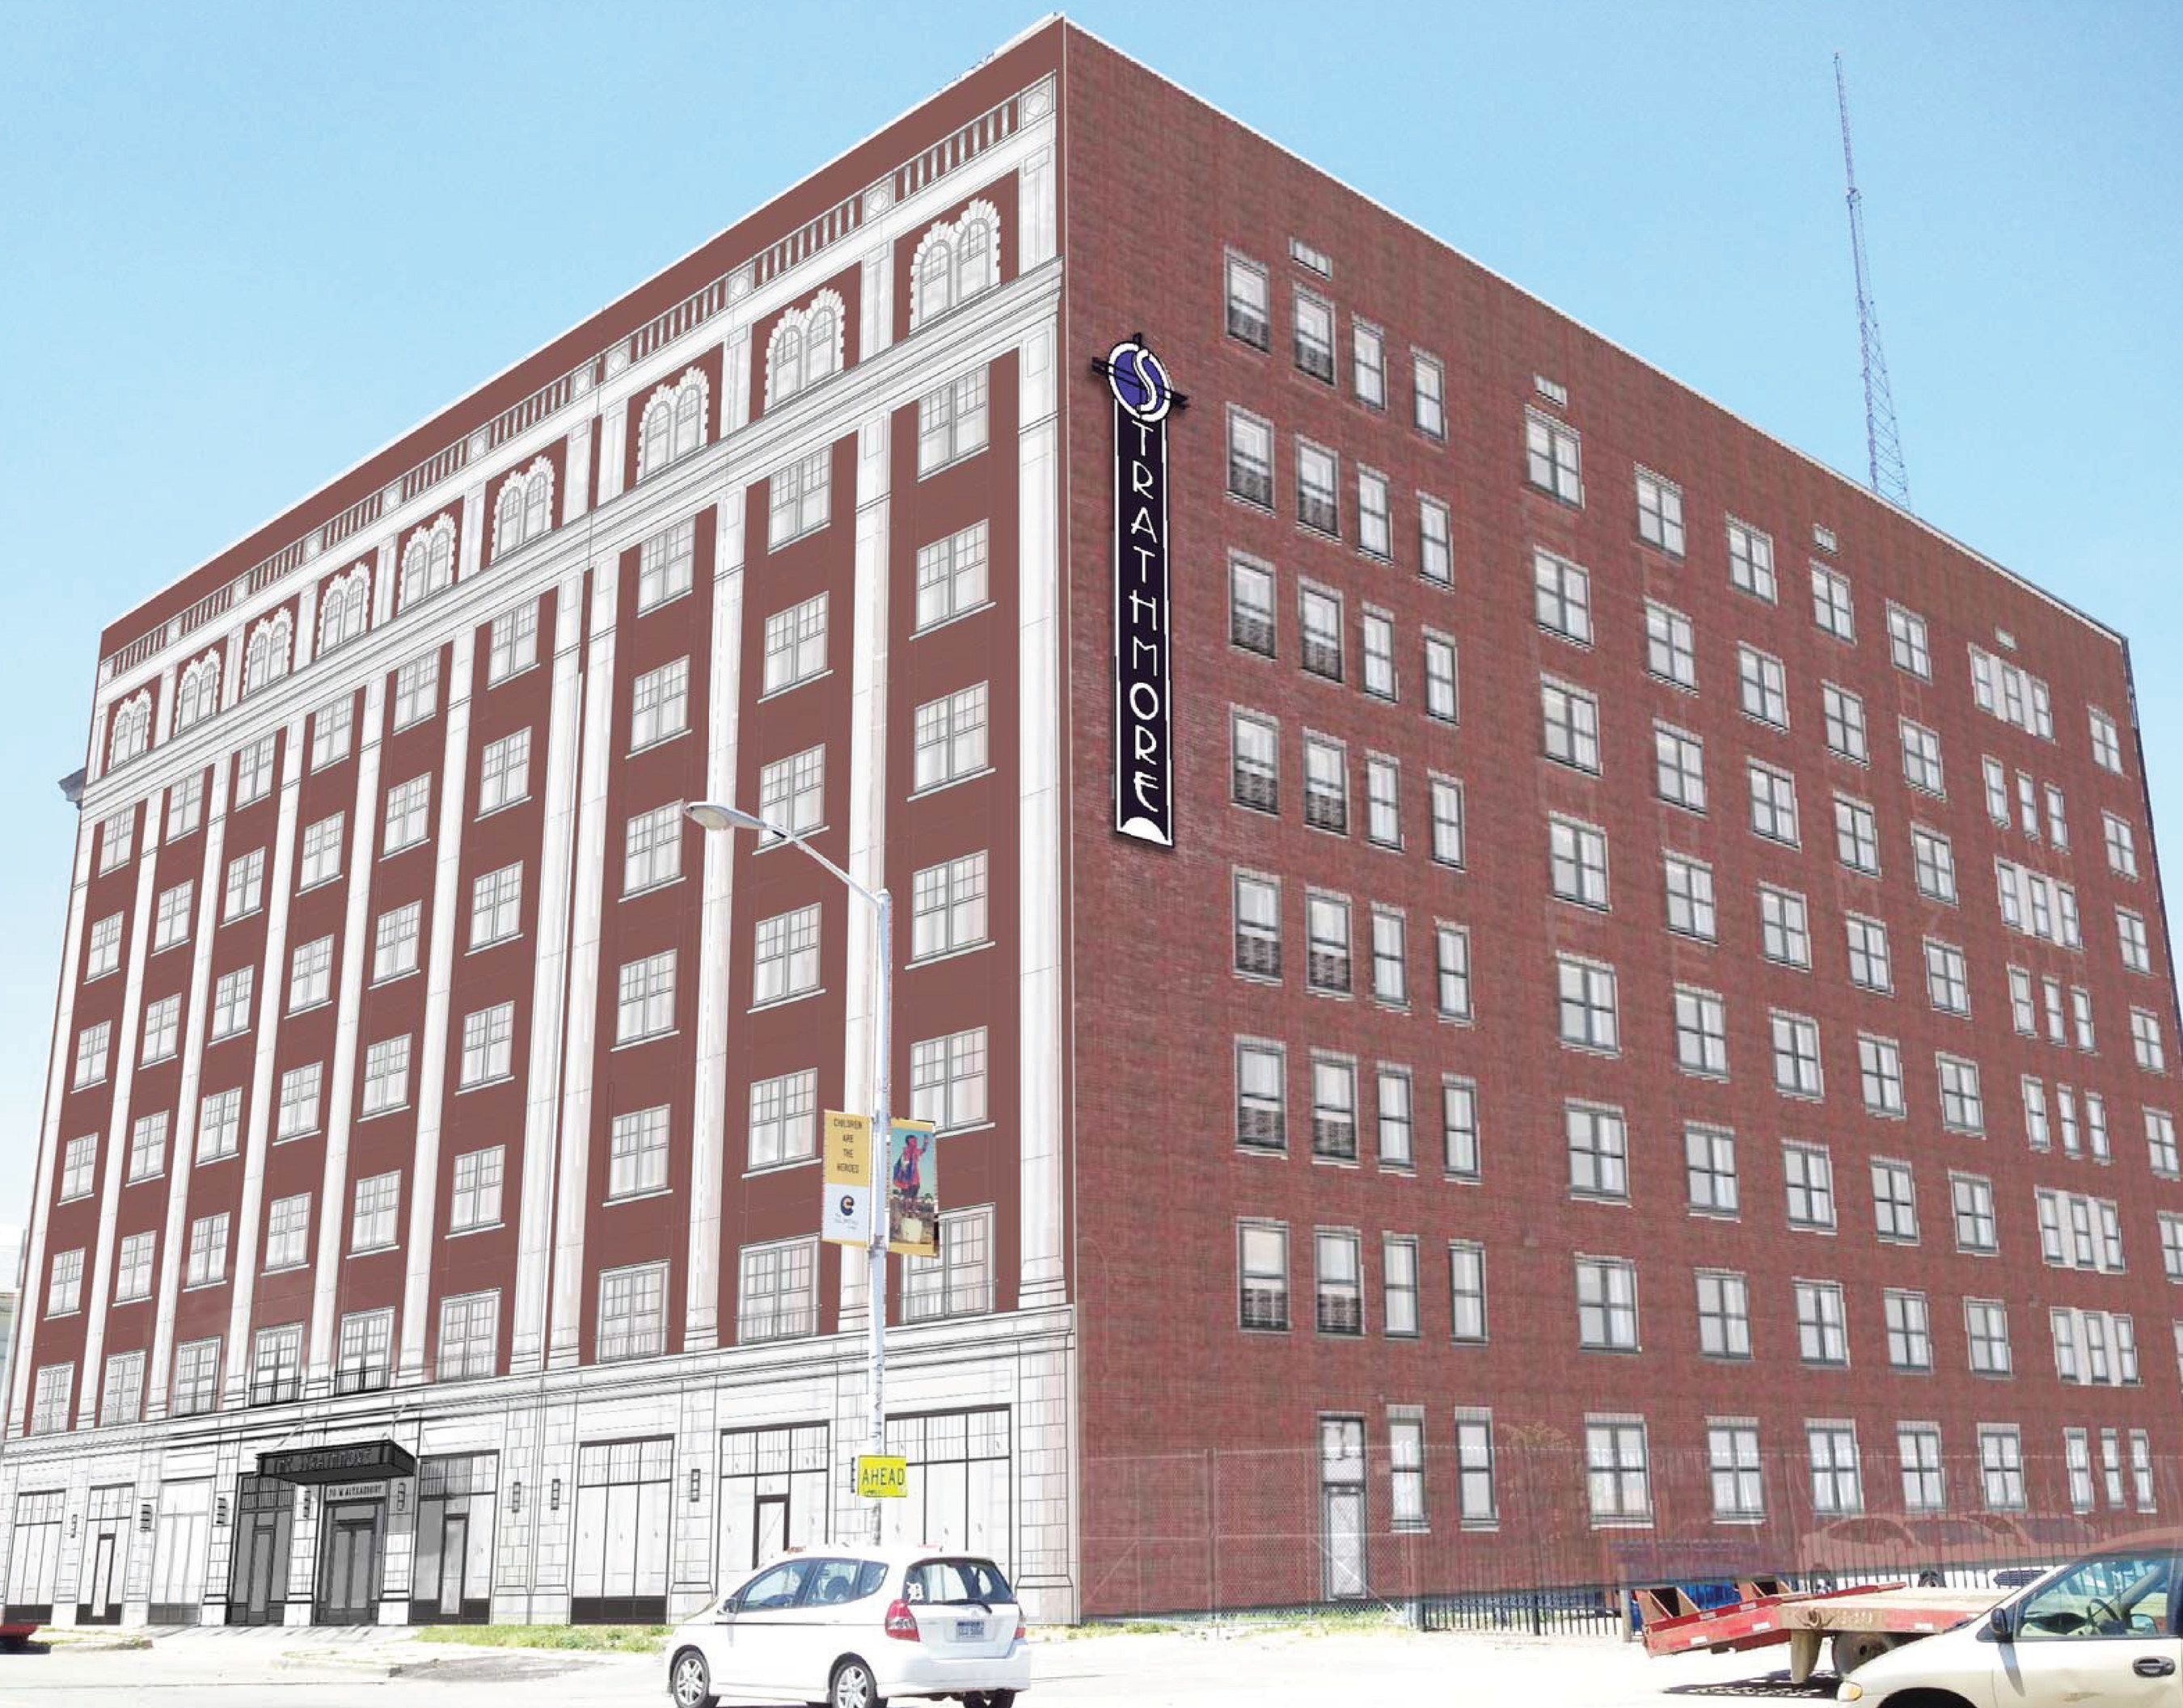 A rendering of the Strathmore in Midtown Detroit, expected to be complete in 2016, which will offer 129 units of affordable and market-rate housing.